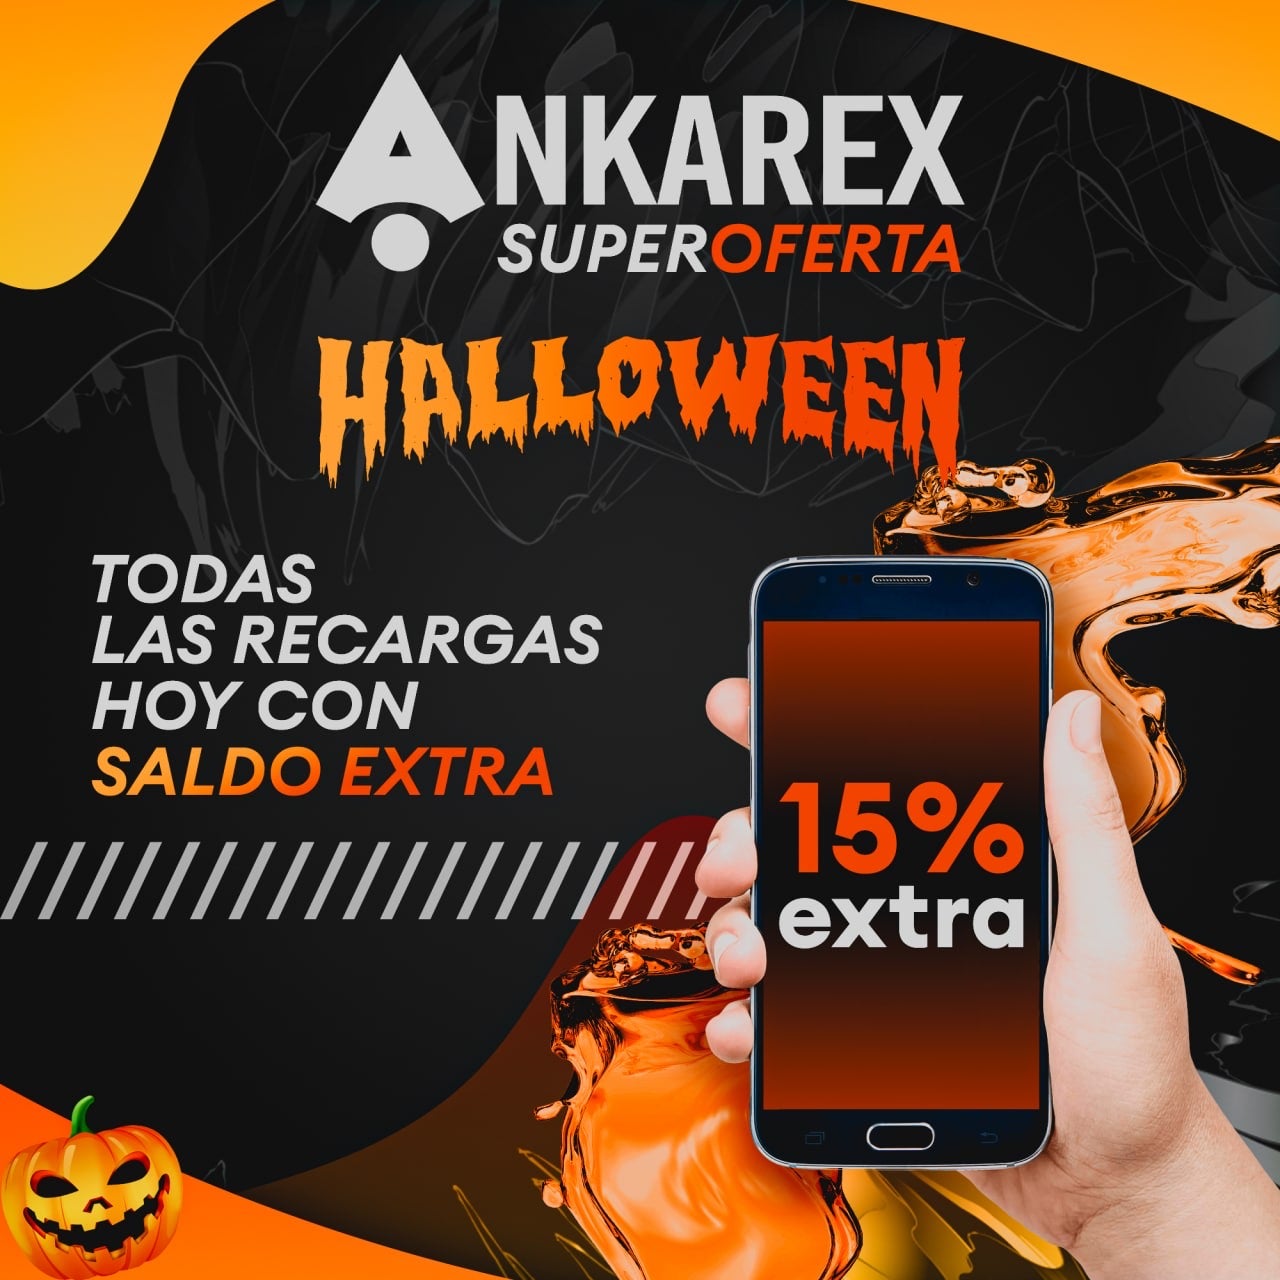 Fig 10: Halloween offer for 15% extra funds when recharging the account